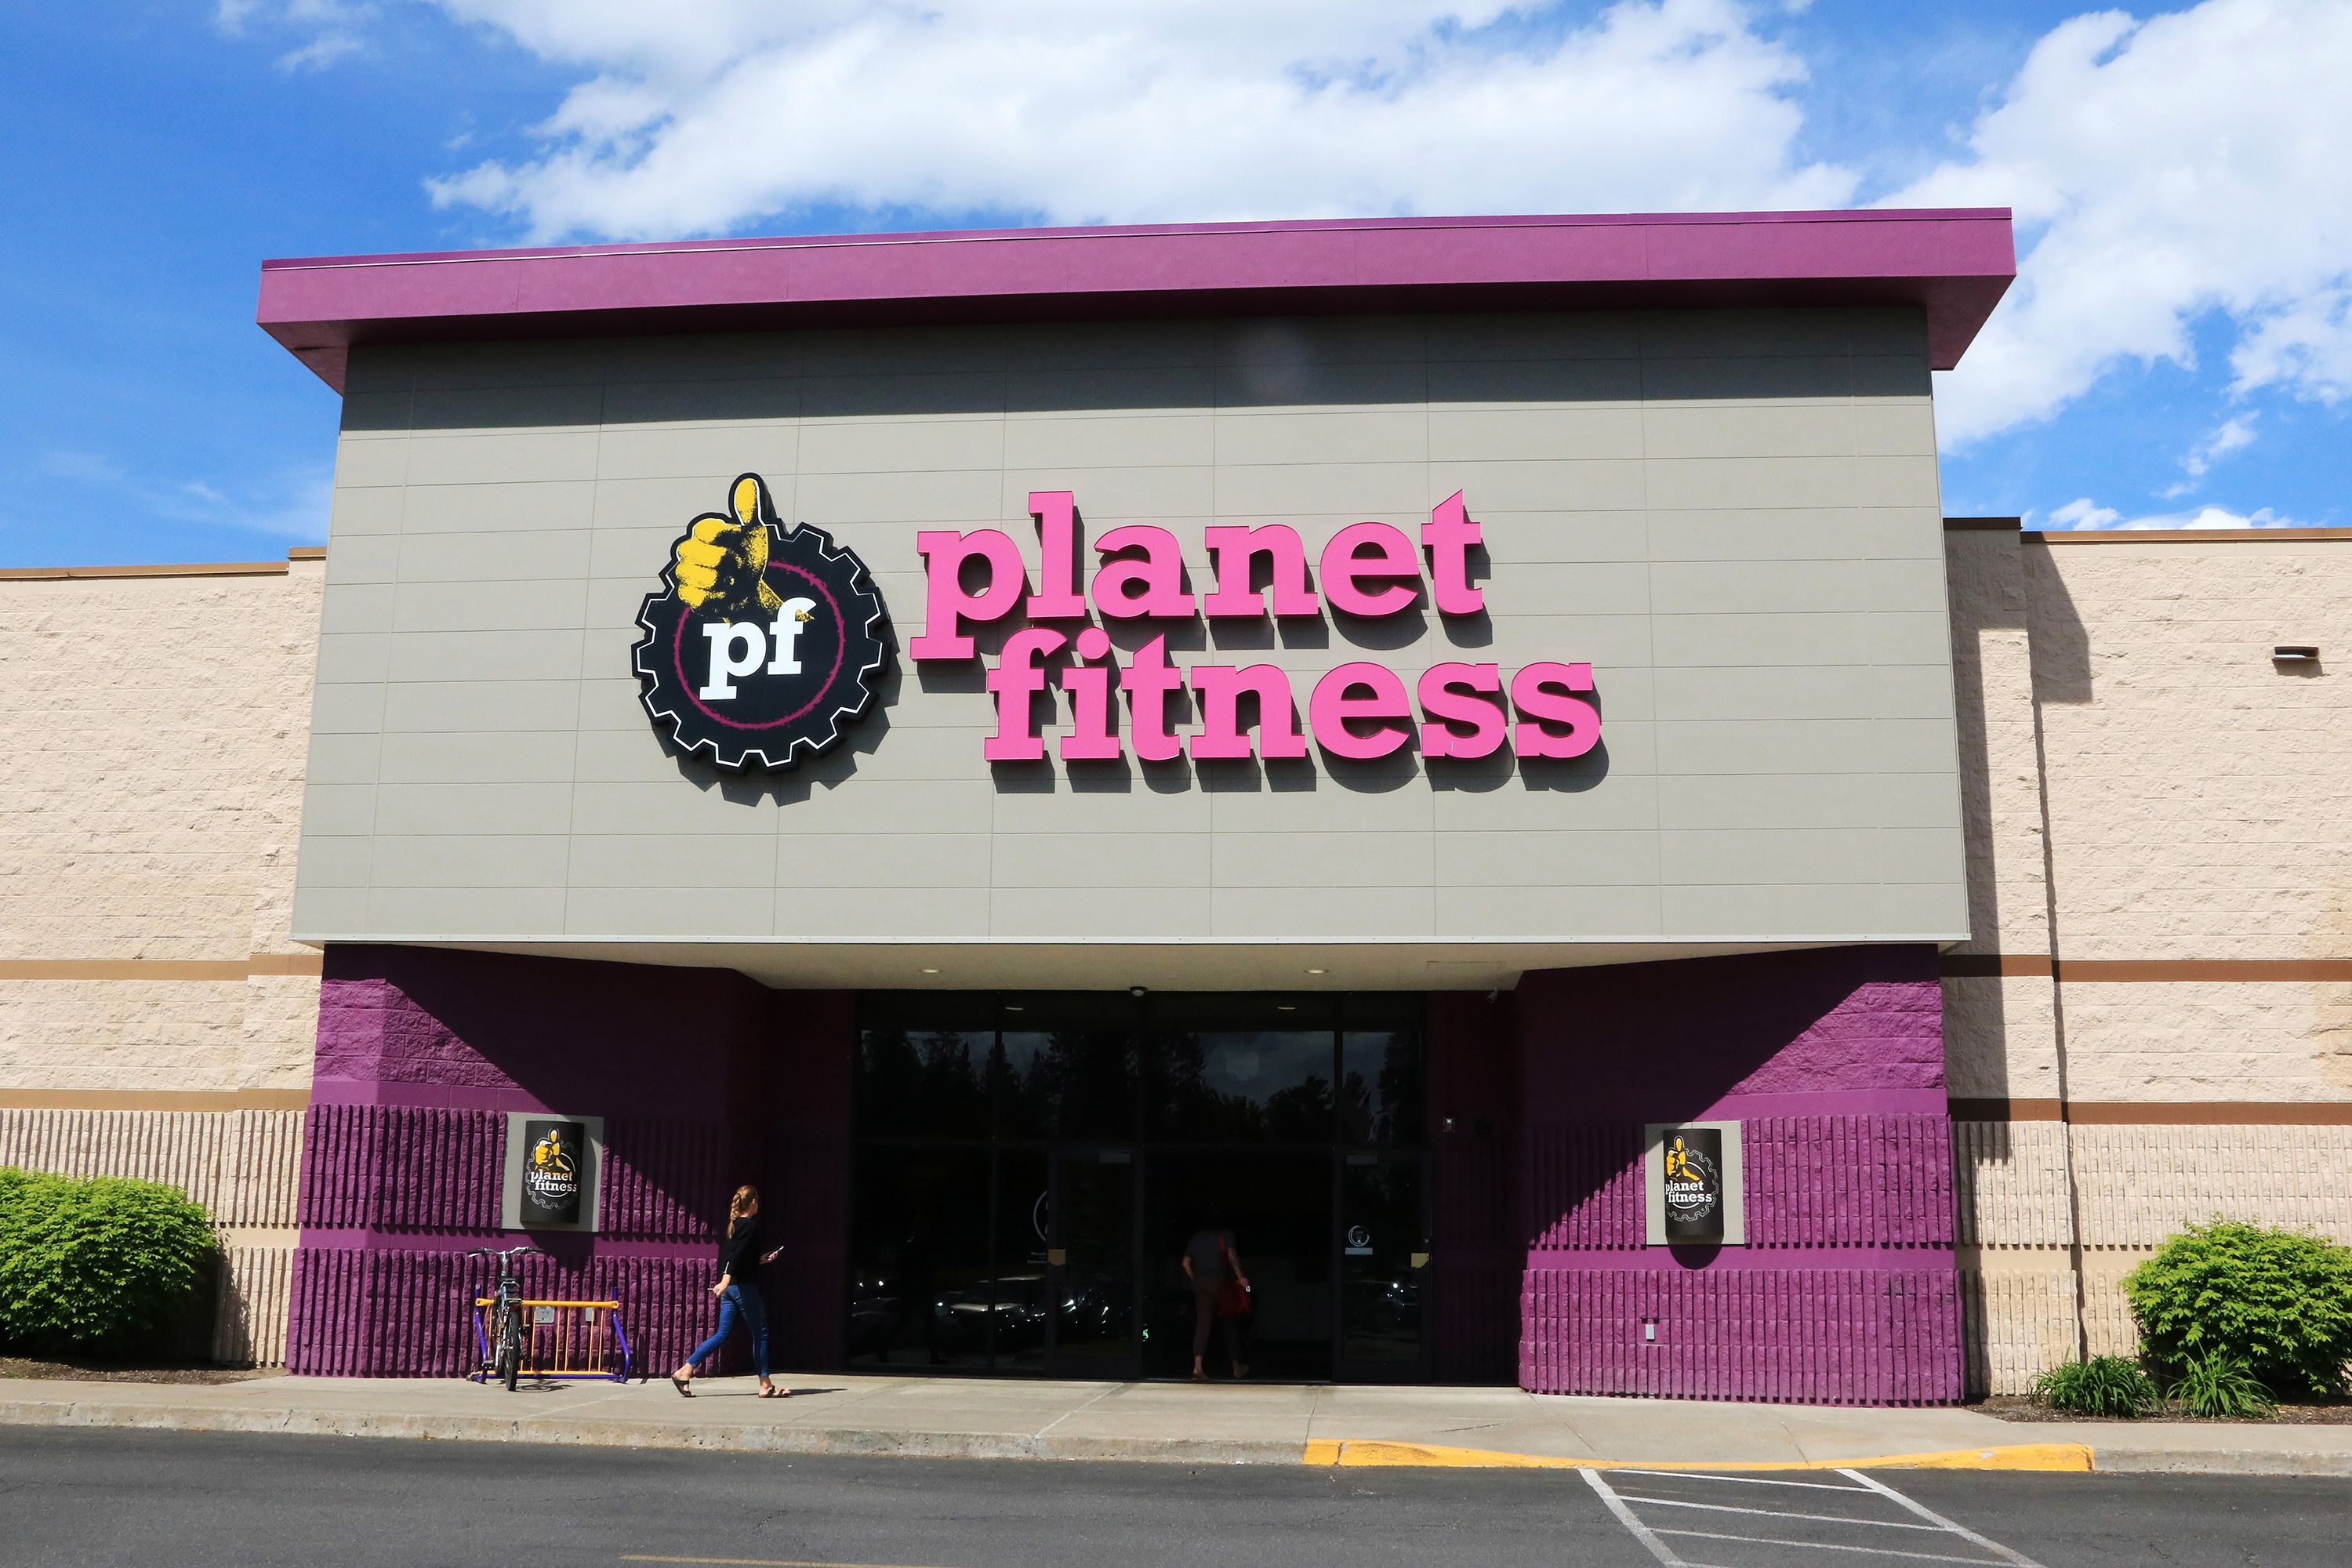  Planet Fitness Team up to Help You Get More Active